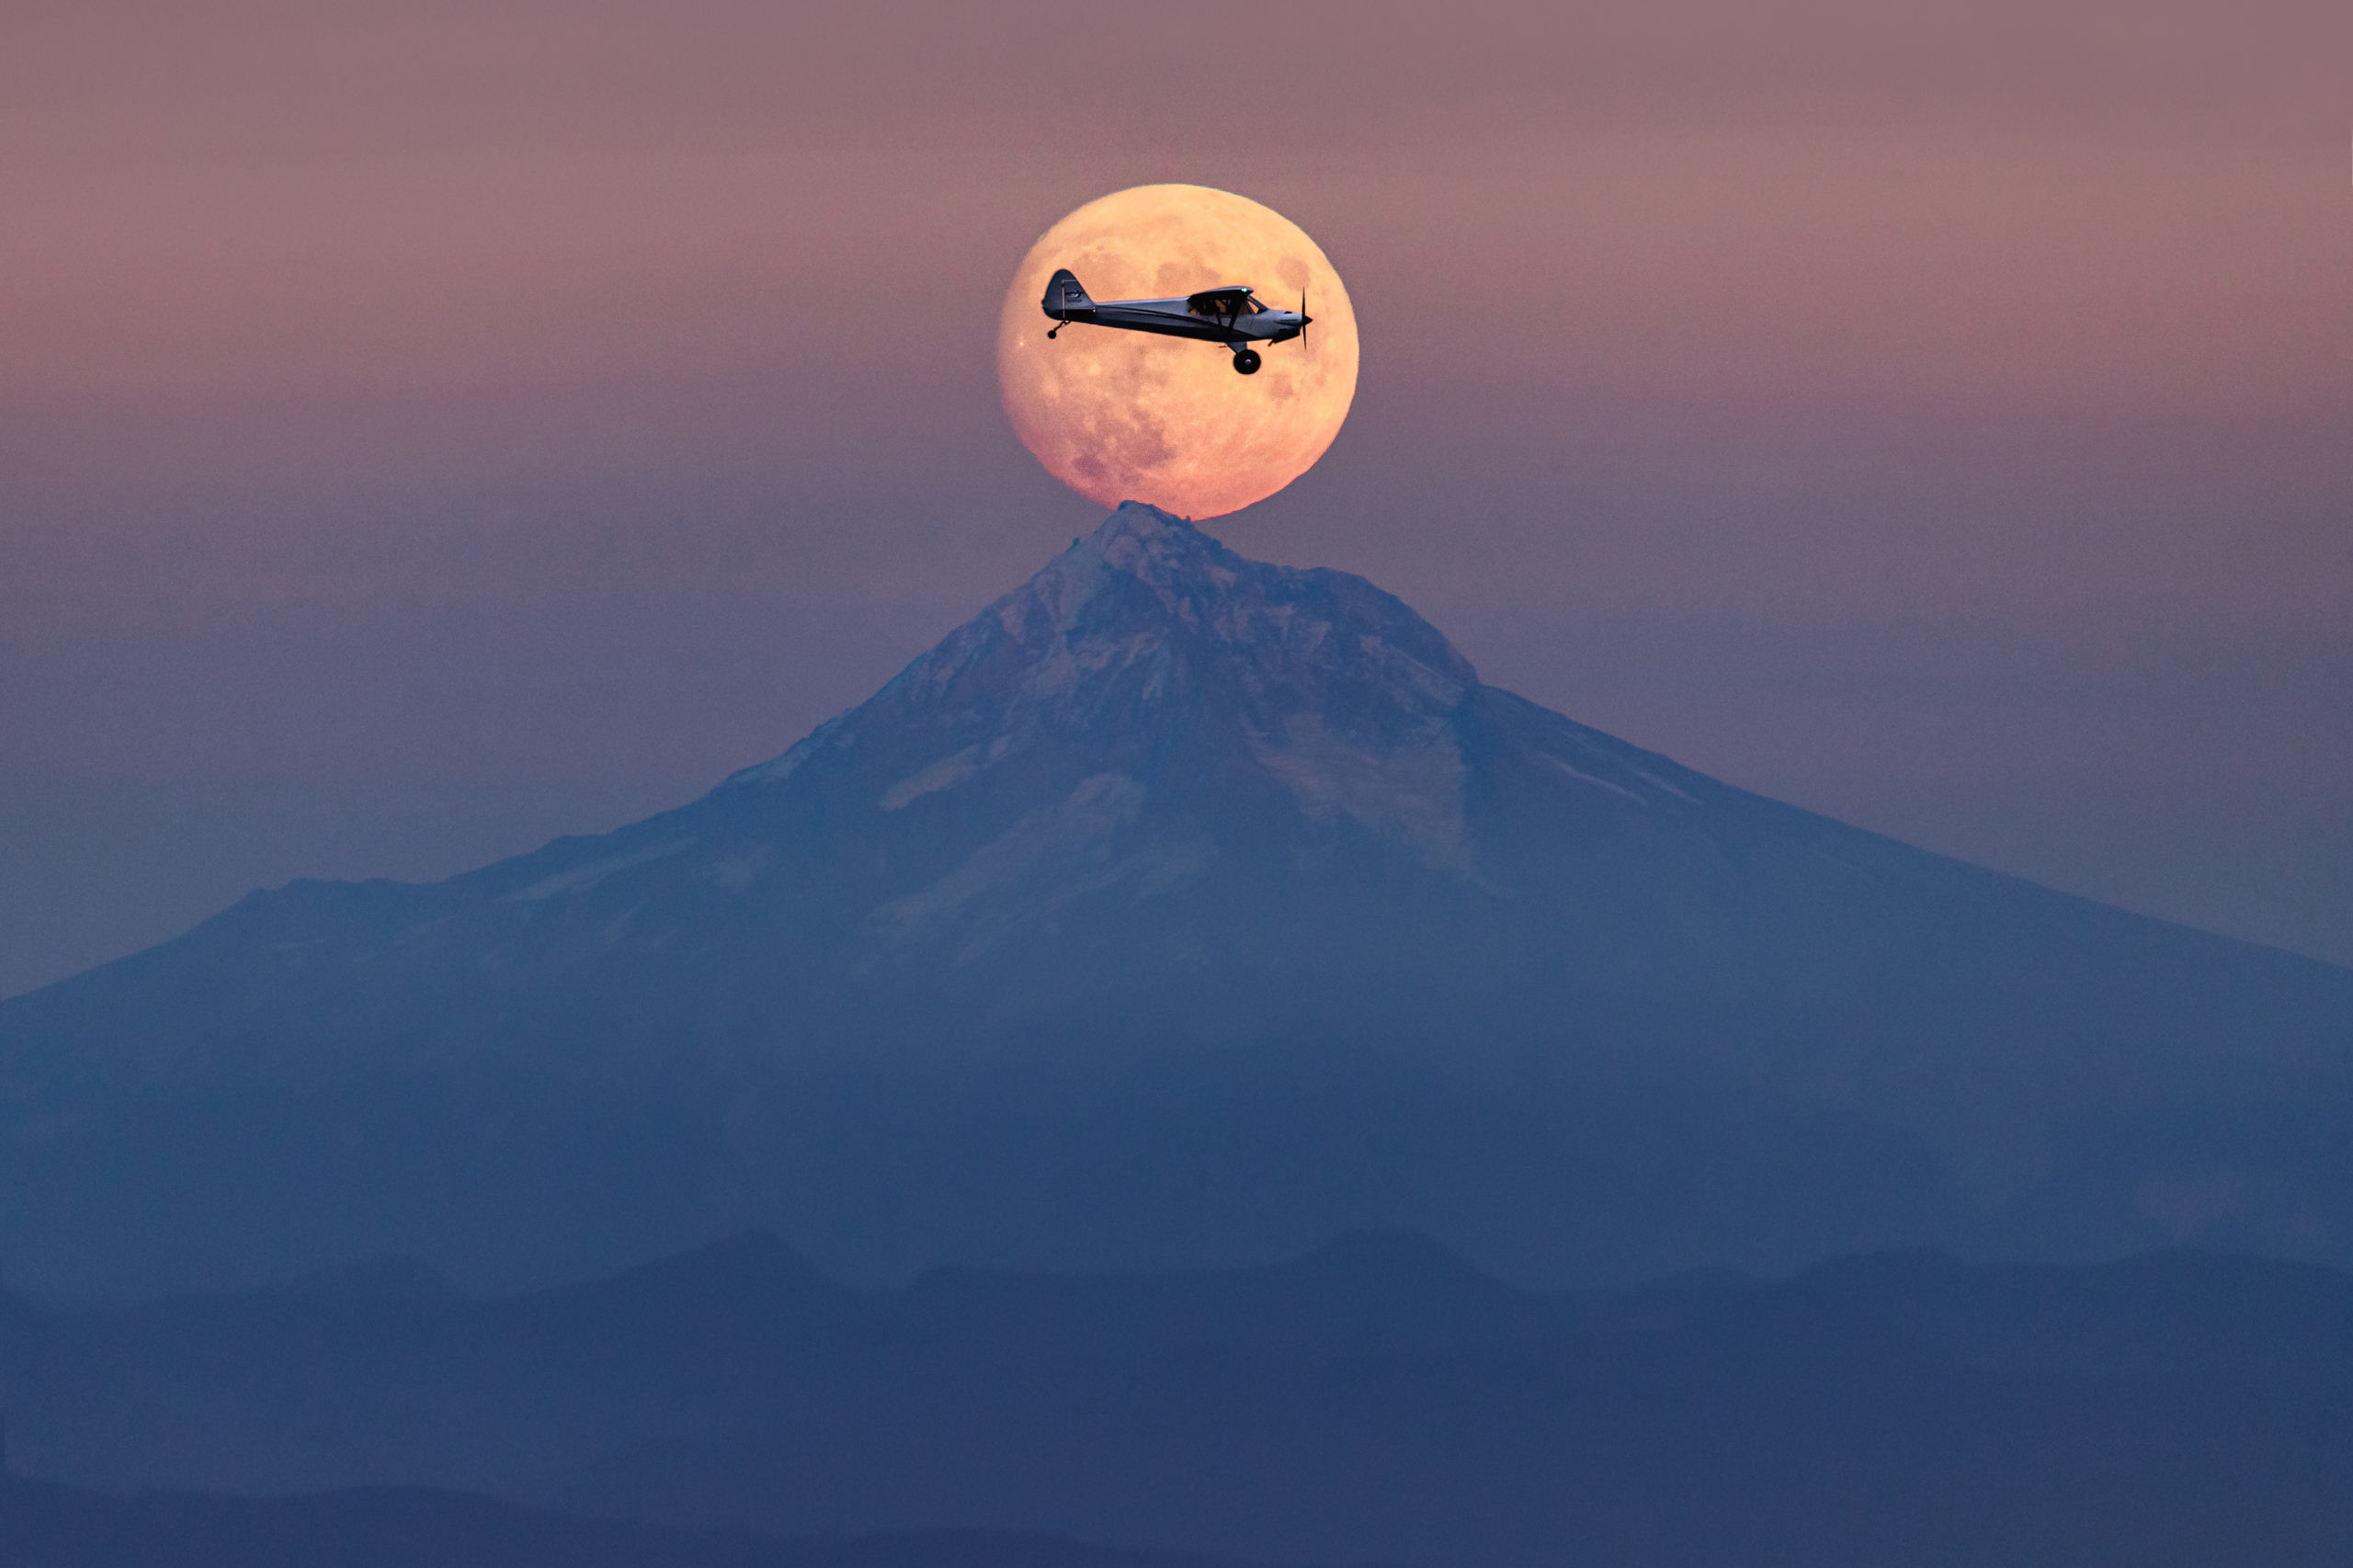 Aviation landscape photography of an airplane within the rising full moon over Mount Hood, Oregon. Single image, no photoshop.